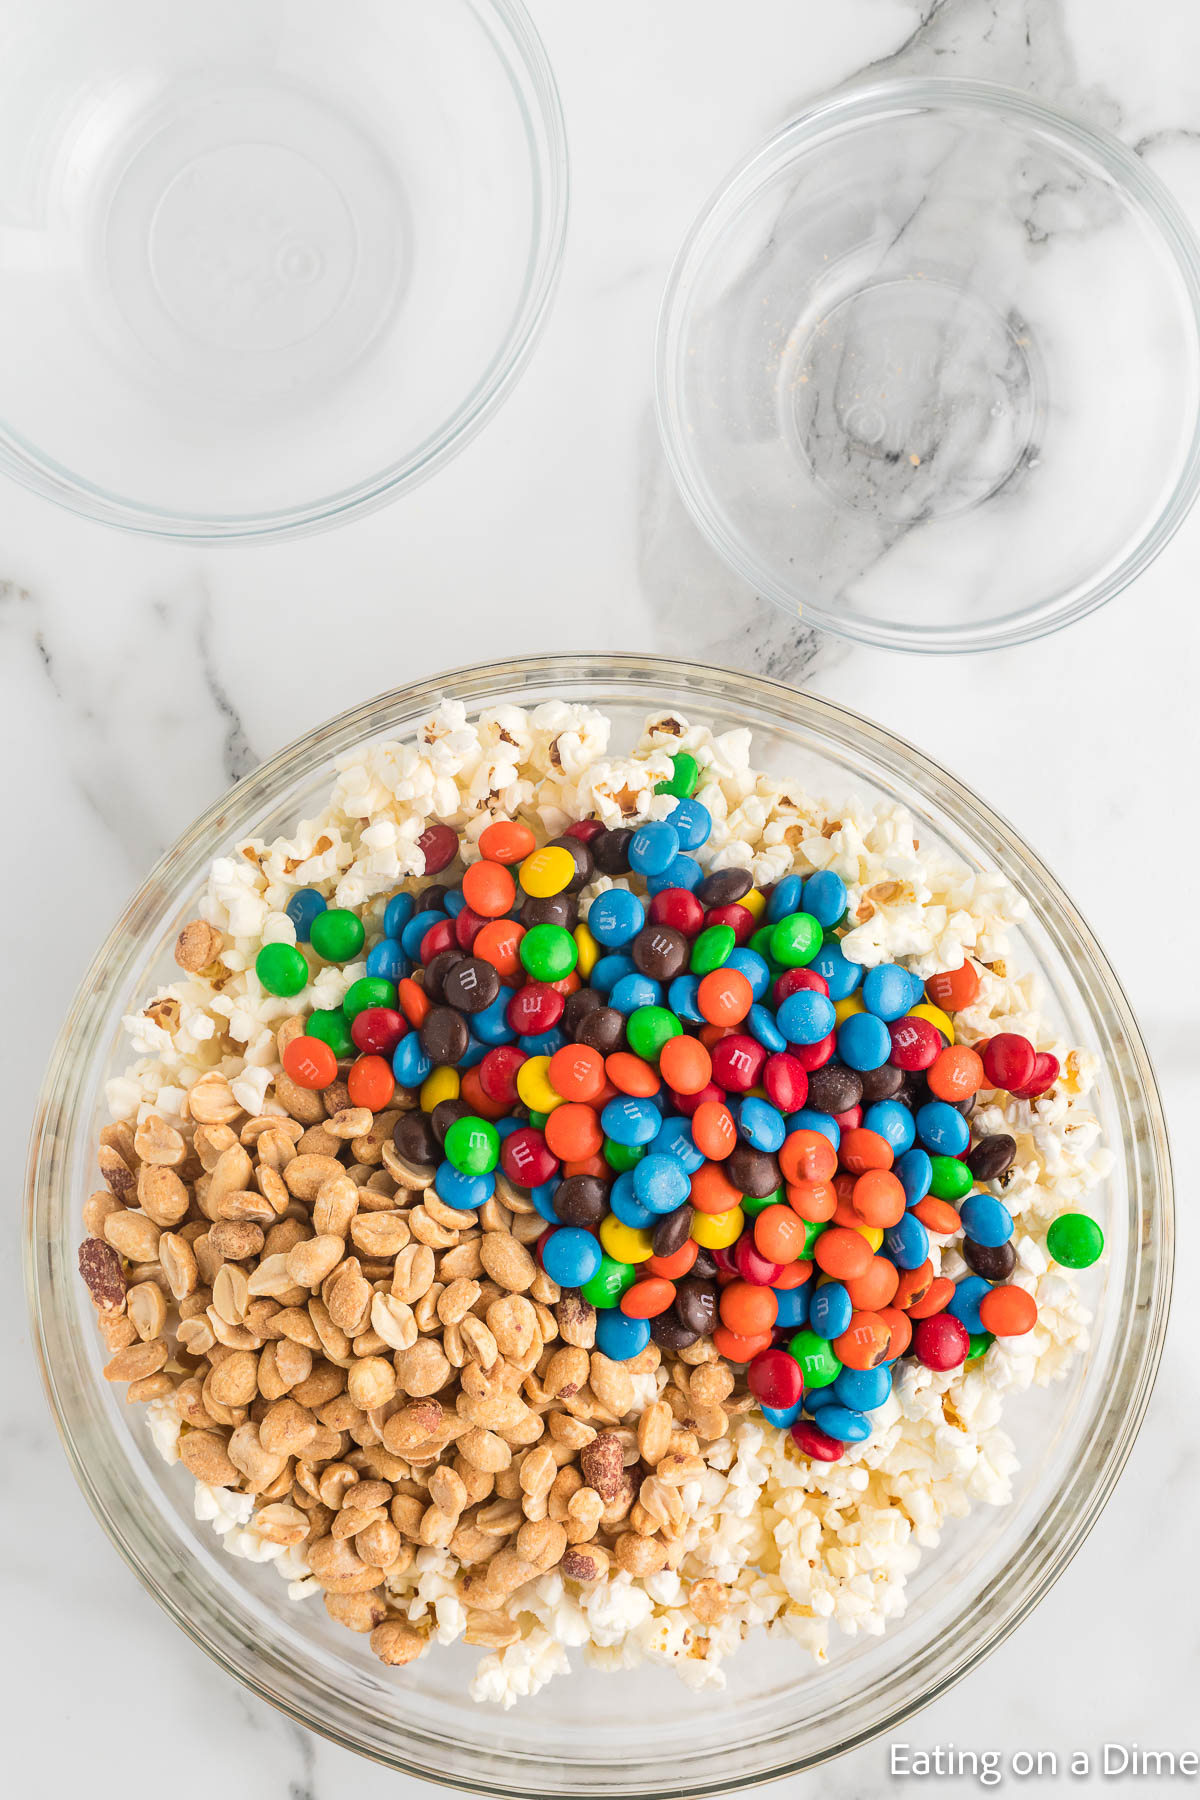 Combining the popcorn, nuts and M&M in a bowl